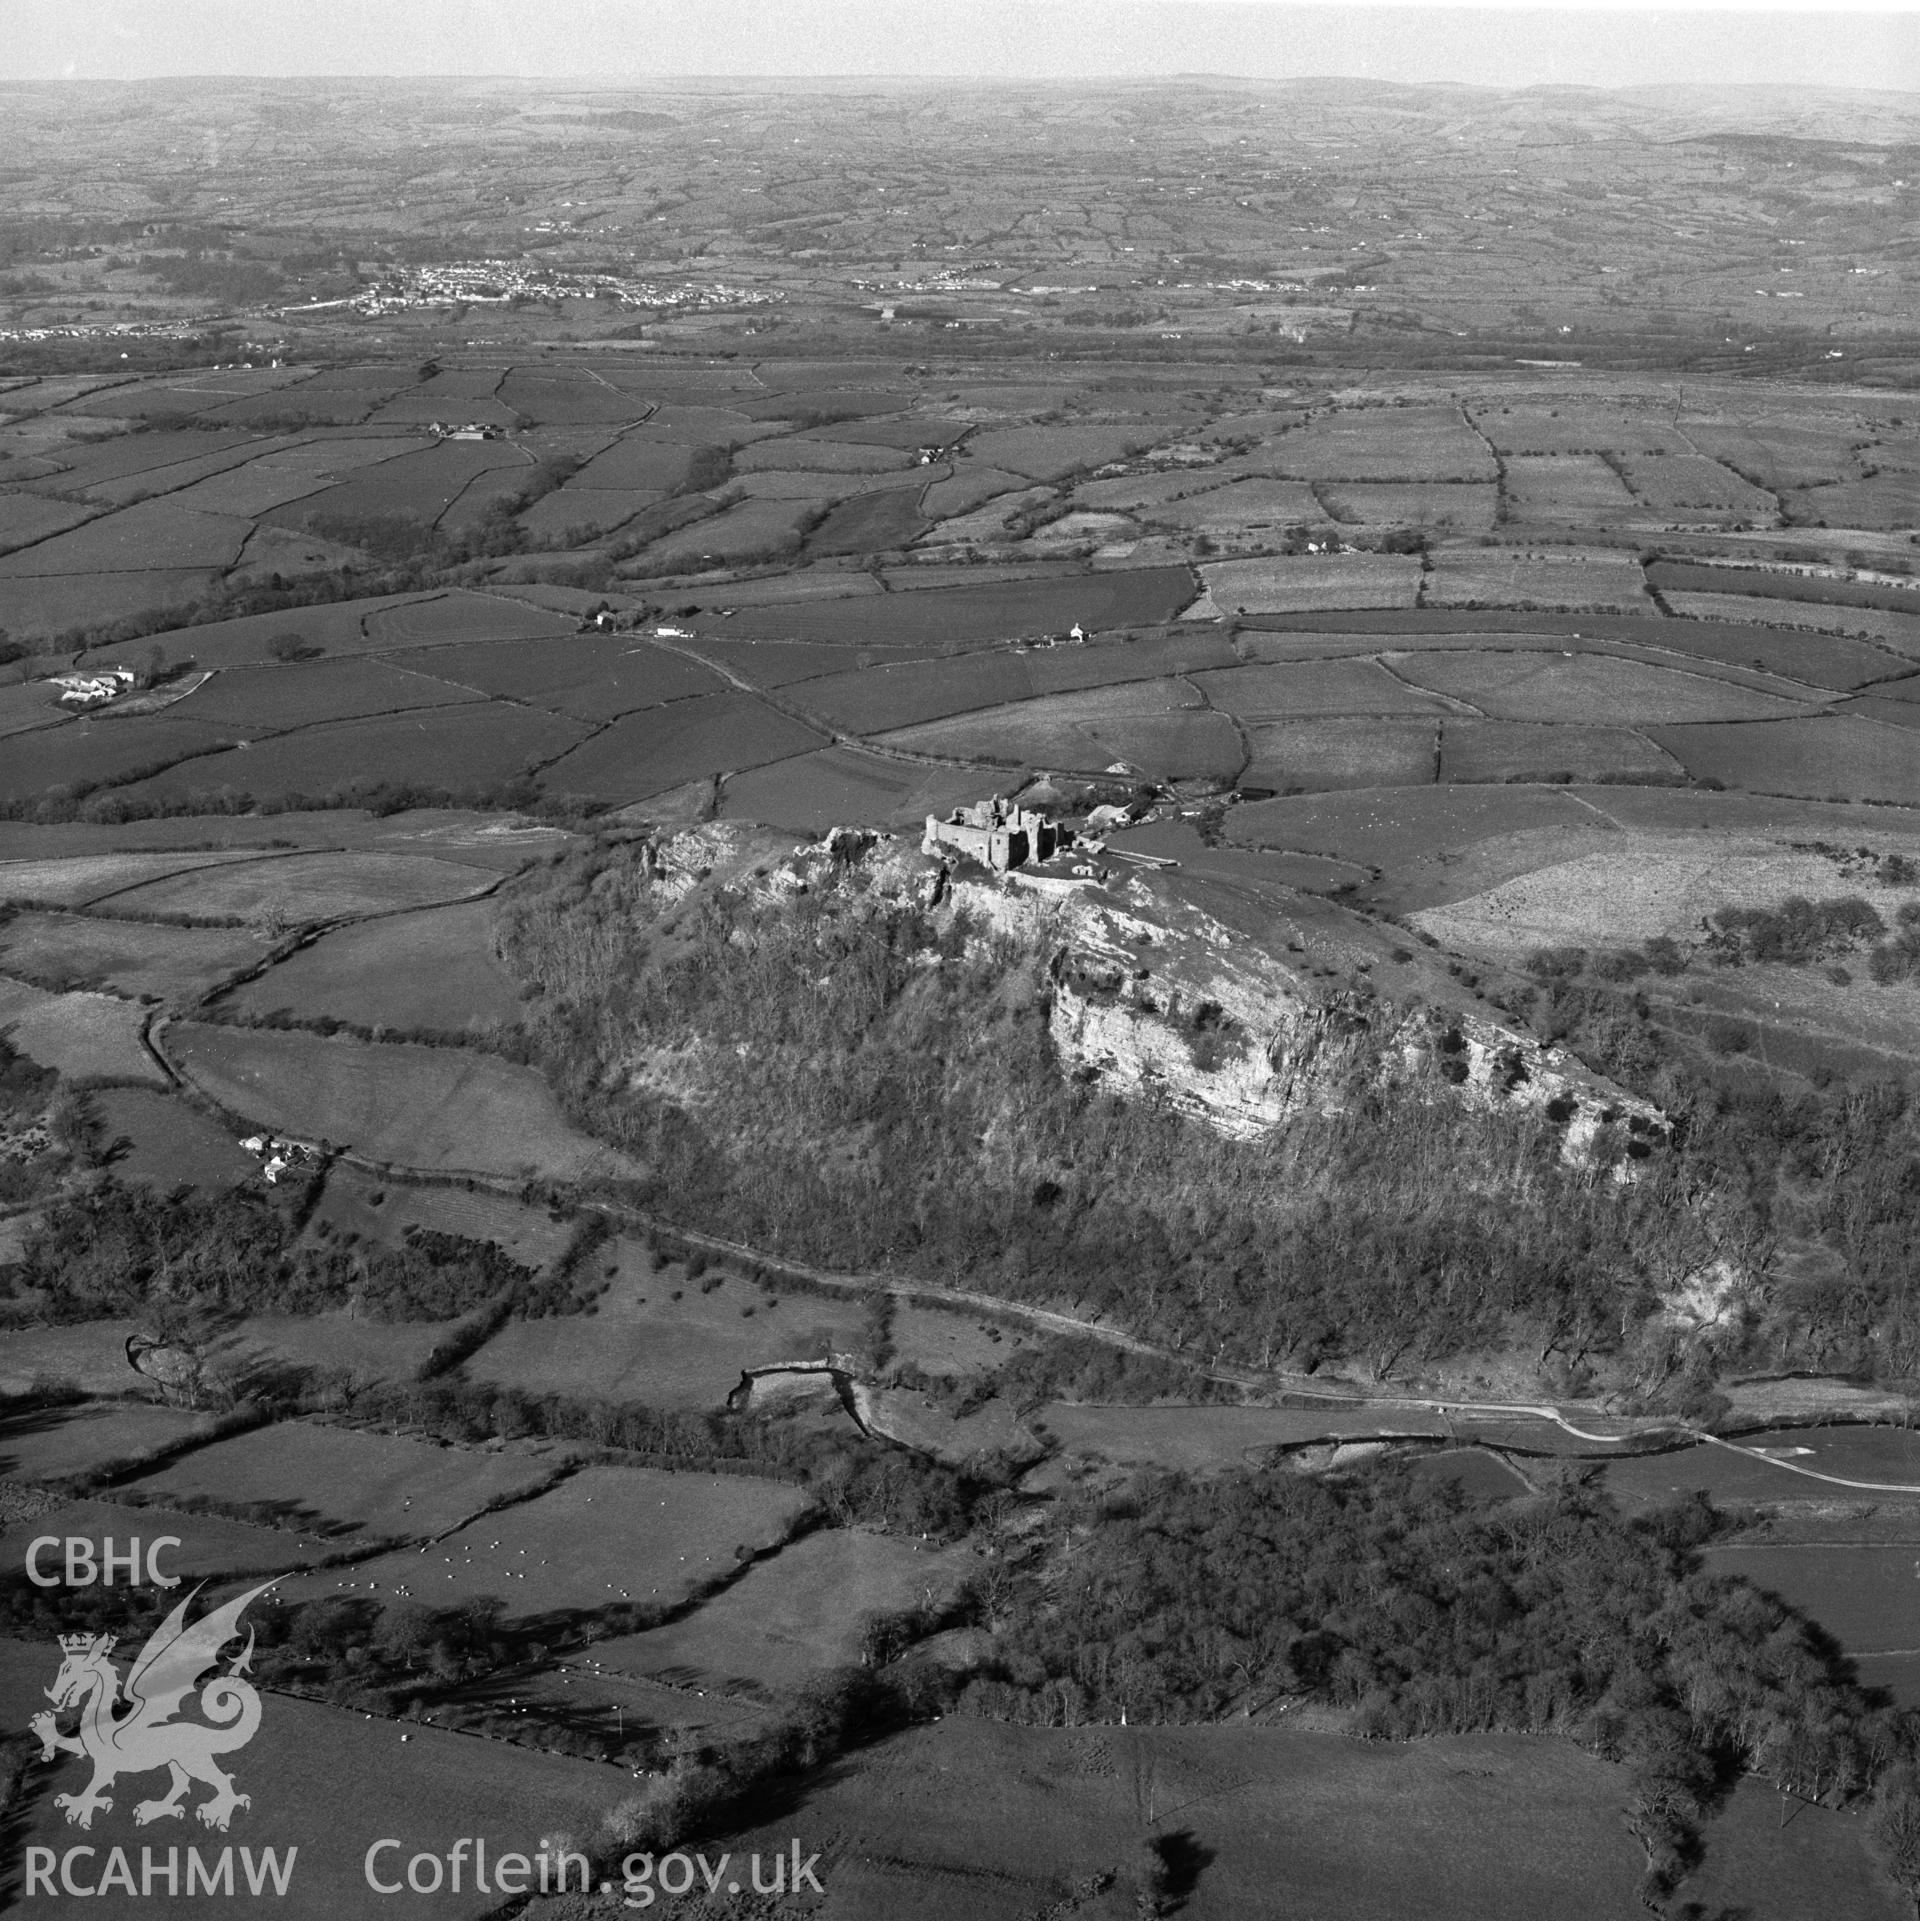 RCAHMW Black and white oblique aerial photograph of Carreg Cennen Castle, taken by CR Musson on 25/02/88